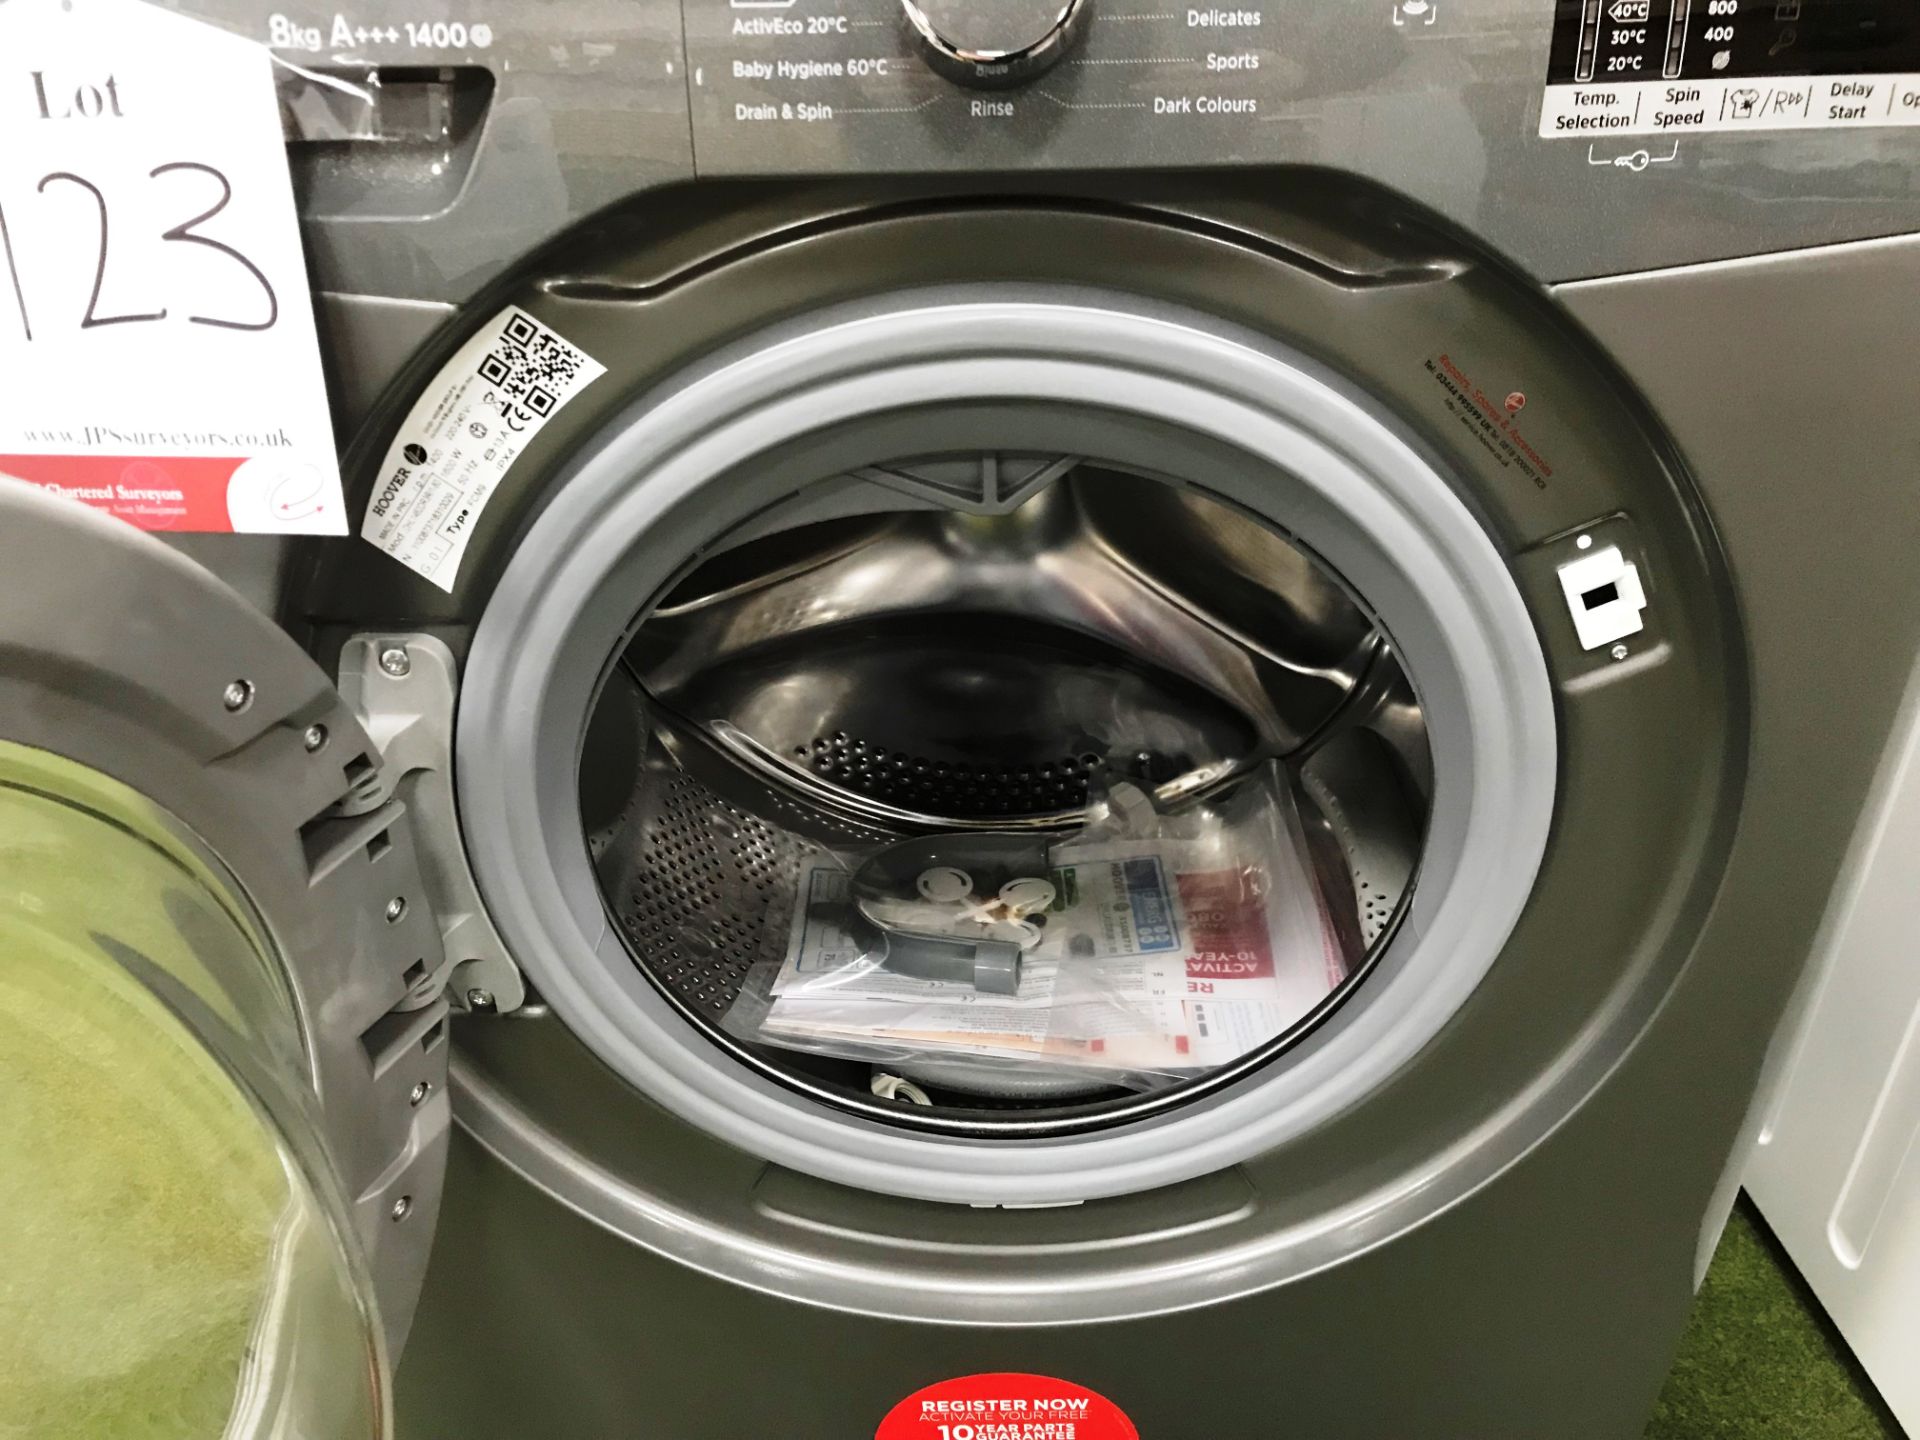 Ex Display Hoover Link DHL 1482D3R NFC Washing Machine - Graphite - RRP£289 - Image 4 of 6